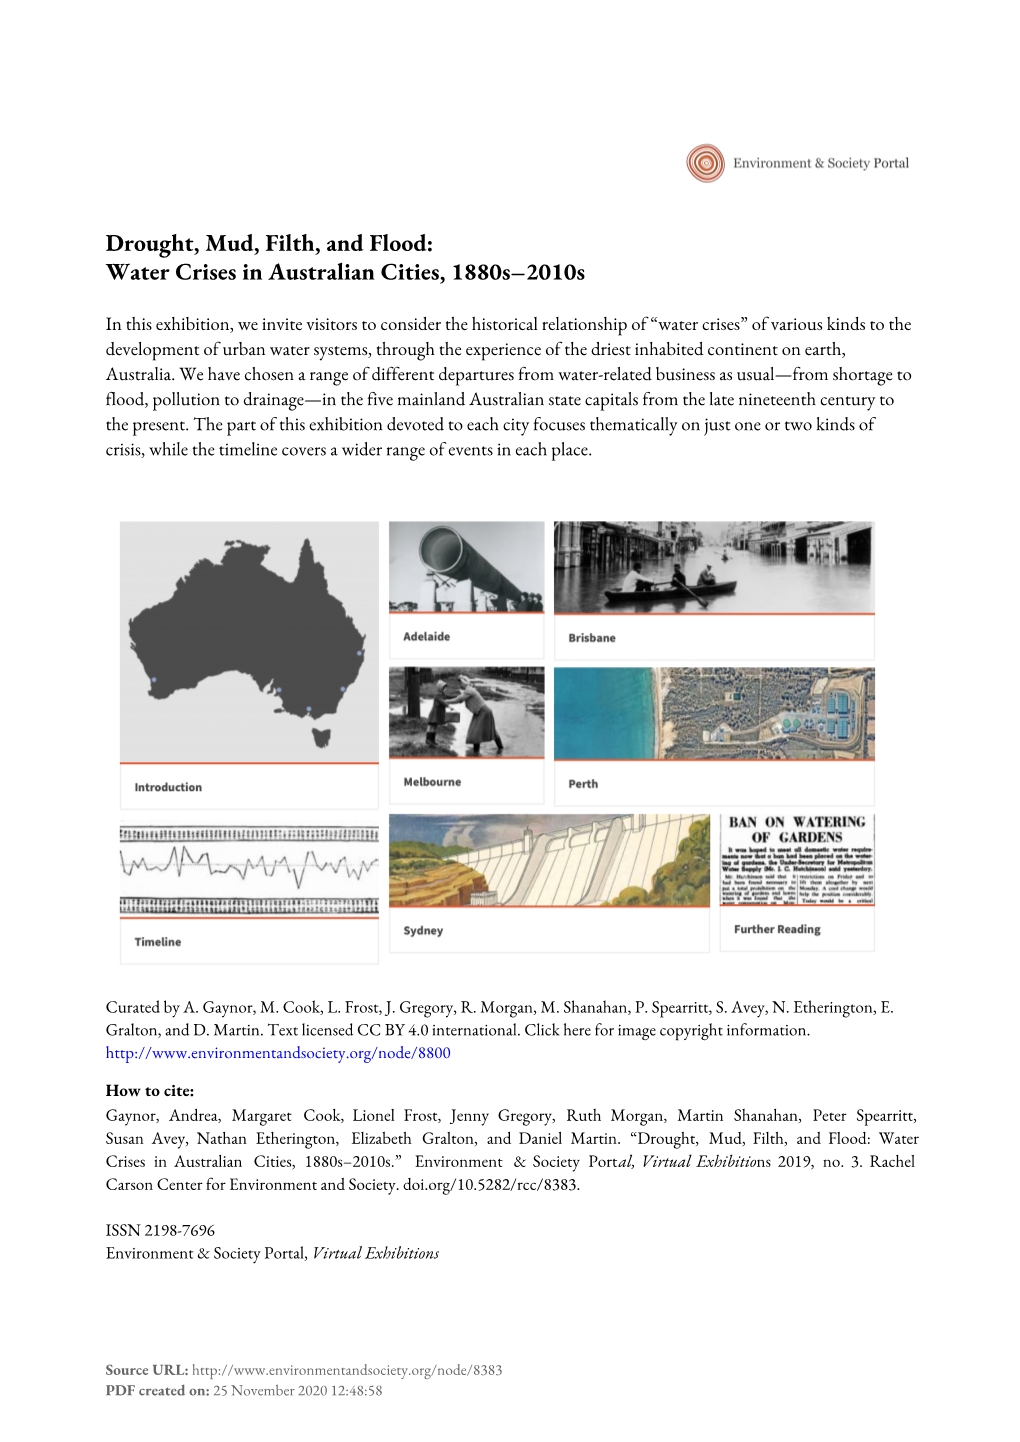 Drought, Mud, Filth, and Flood: Water Crises in Australian Cities, 1880S–2010S